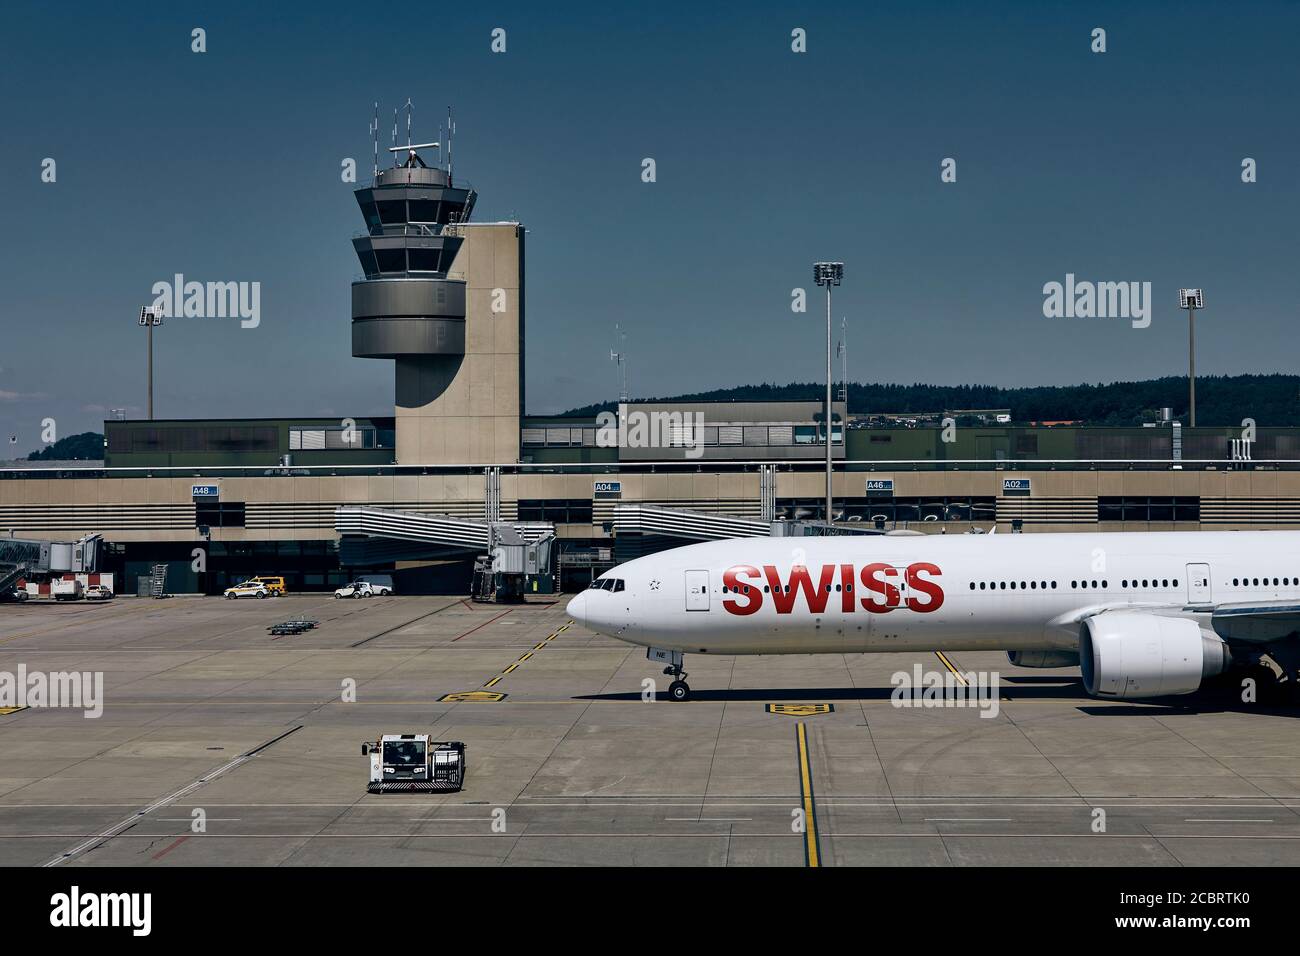 Zurich, Switzerland - August 07, 2020: Flagship of Swiss International Air Lines Boeing 777-300ER during taxiing at Zurich Airport on August 07, 2020. Stock Photo